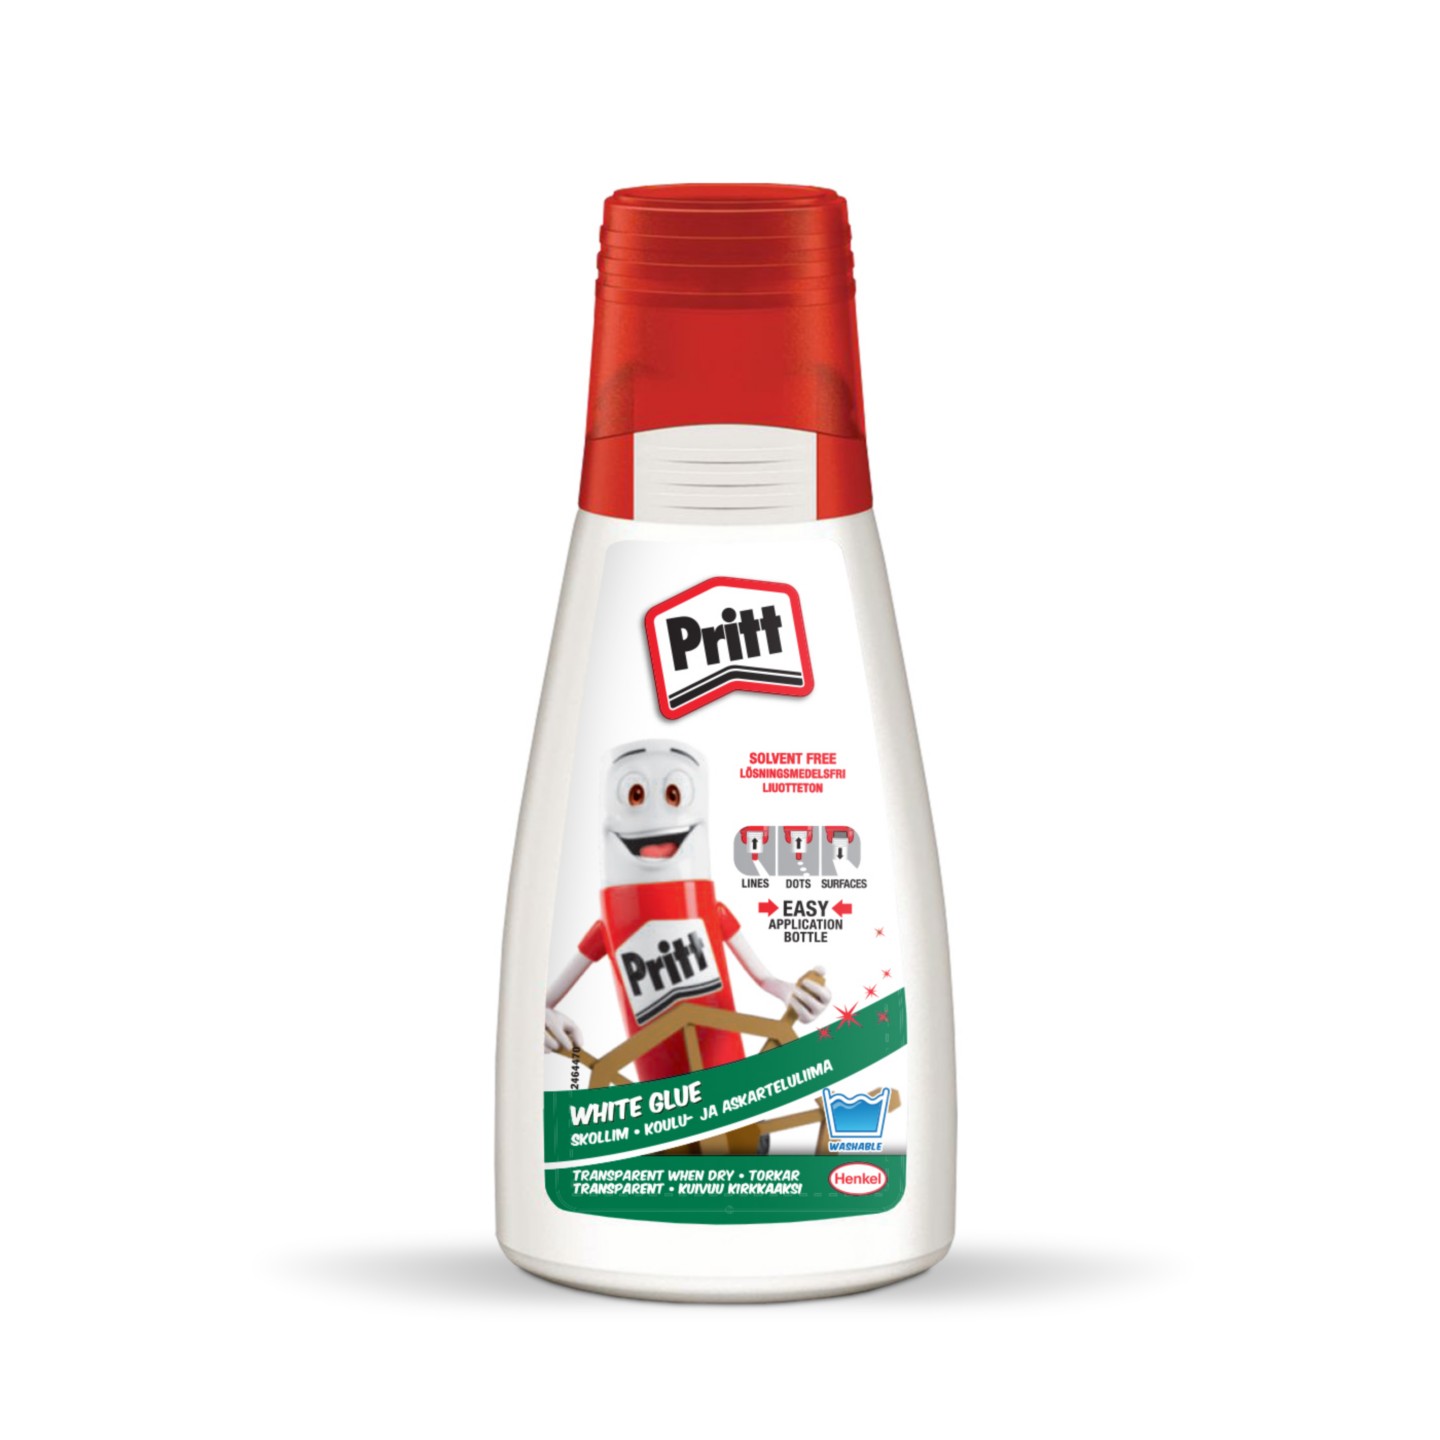 Colle blanche bouteille - Pritt